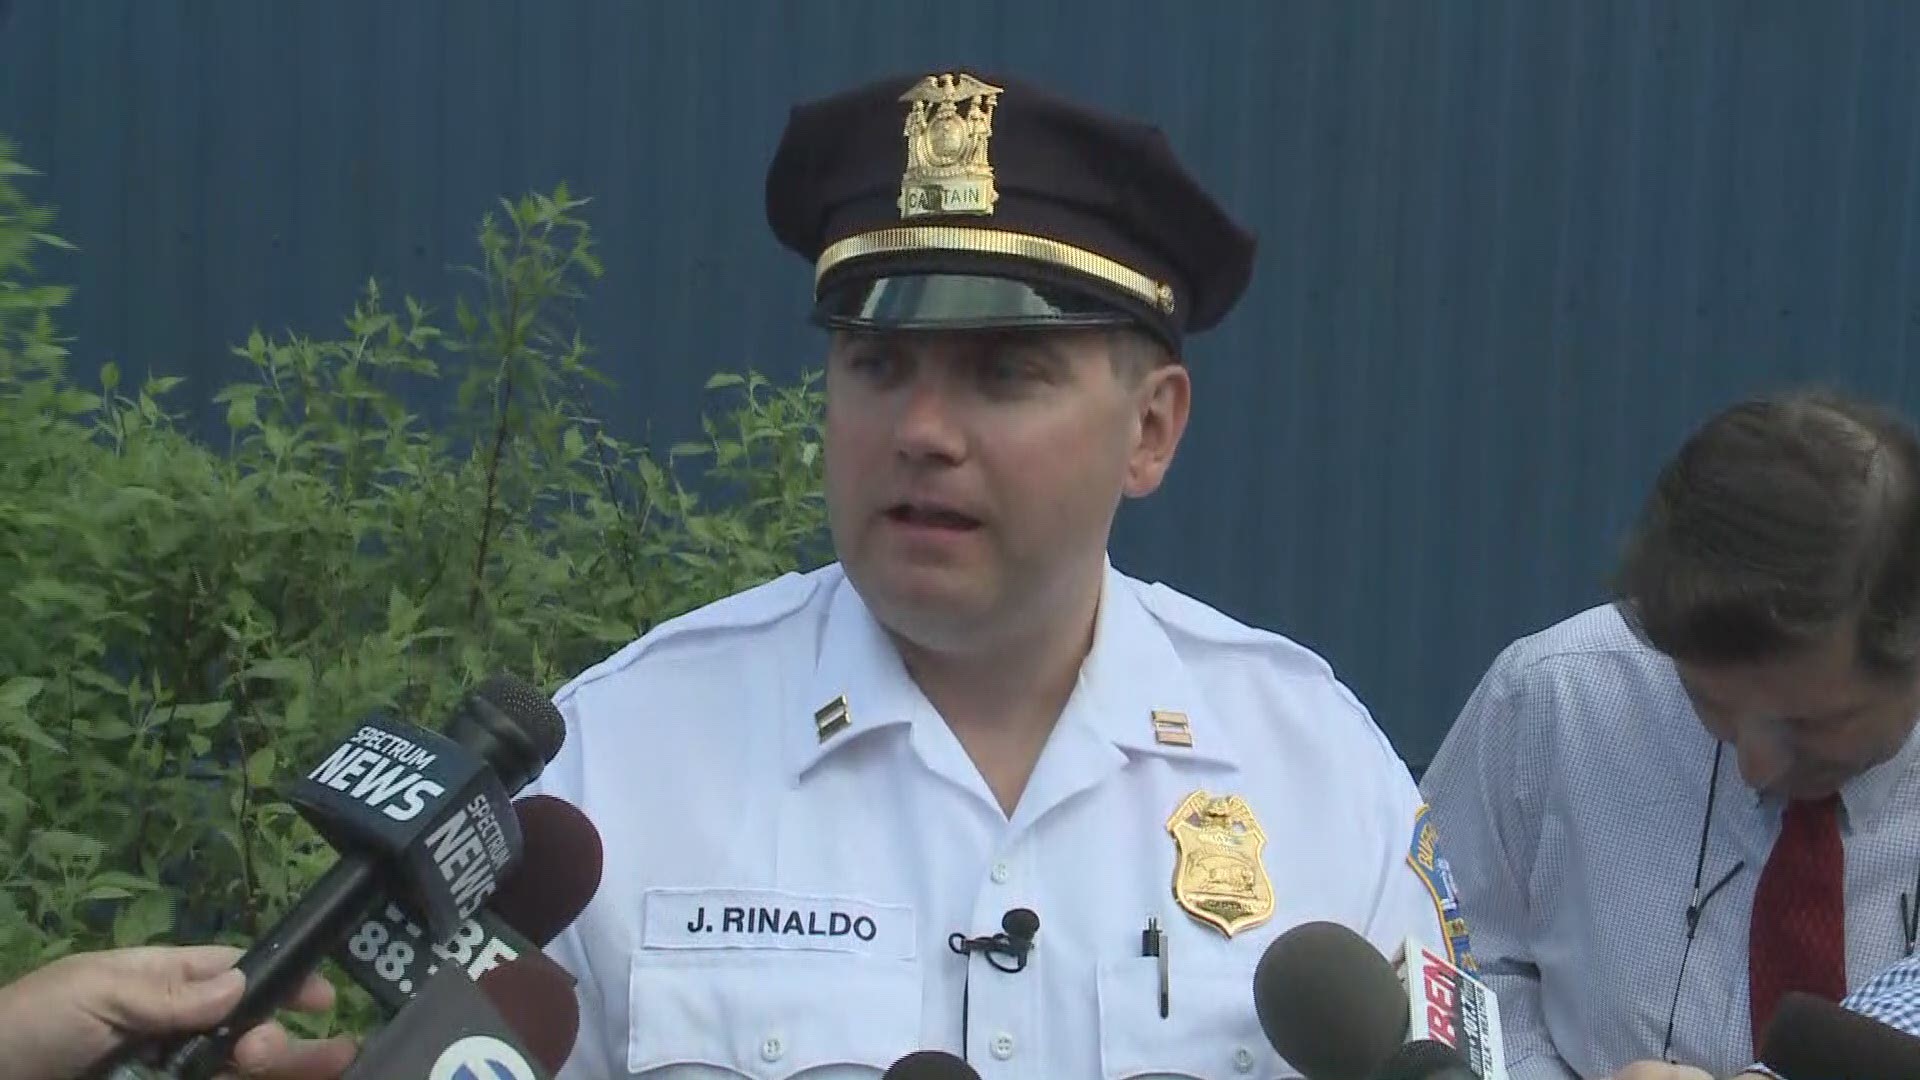 Buffalo Police discuss details about the  death  of a patient at Emerald South Nursing Home